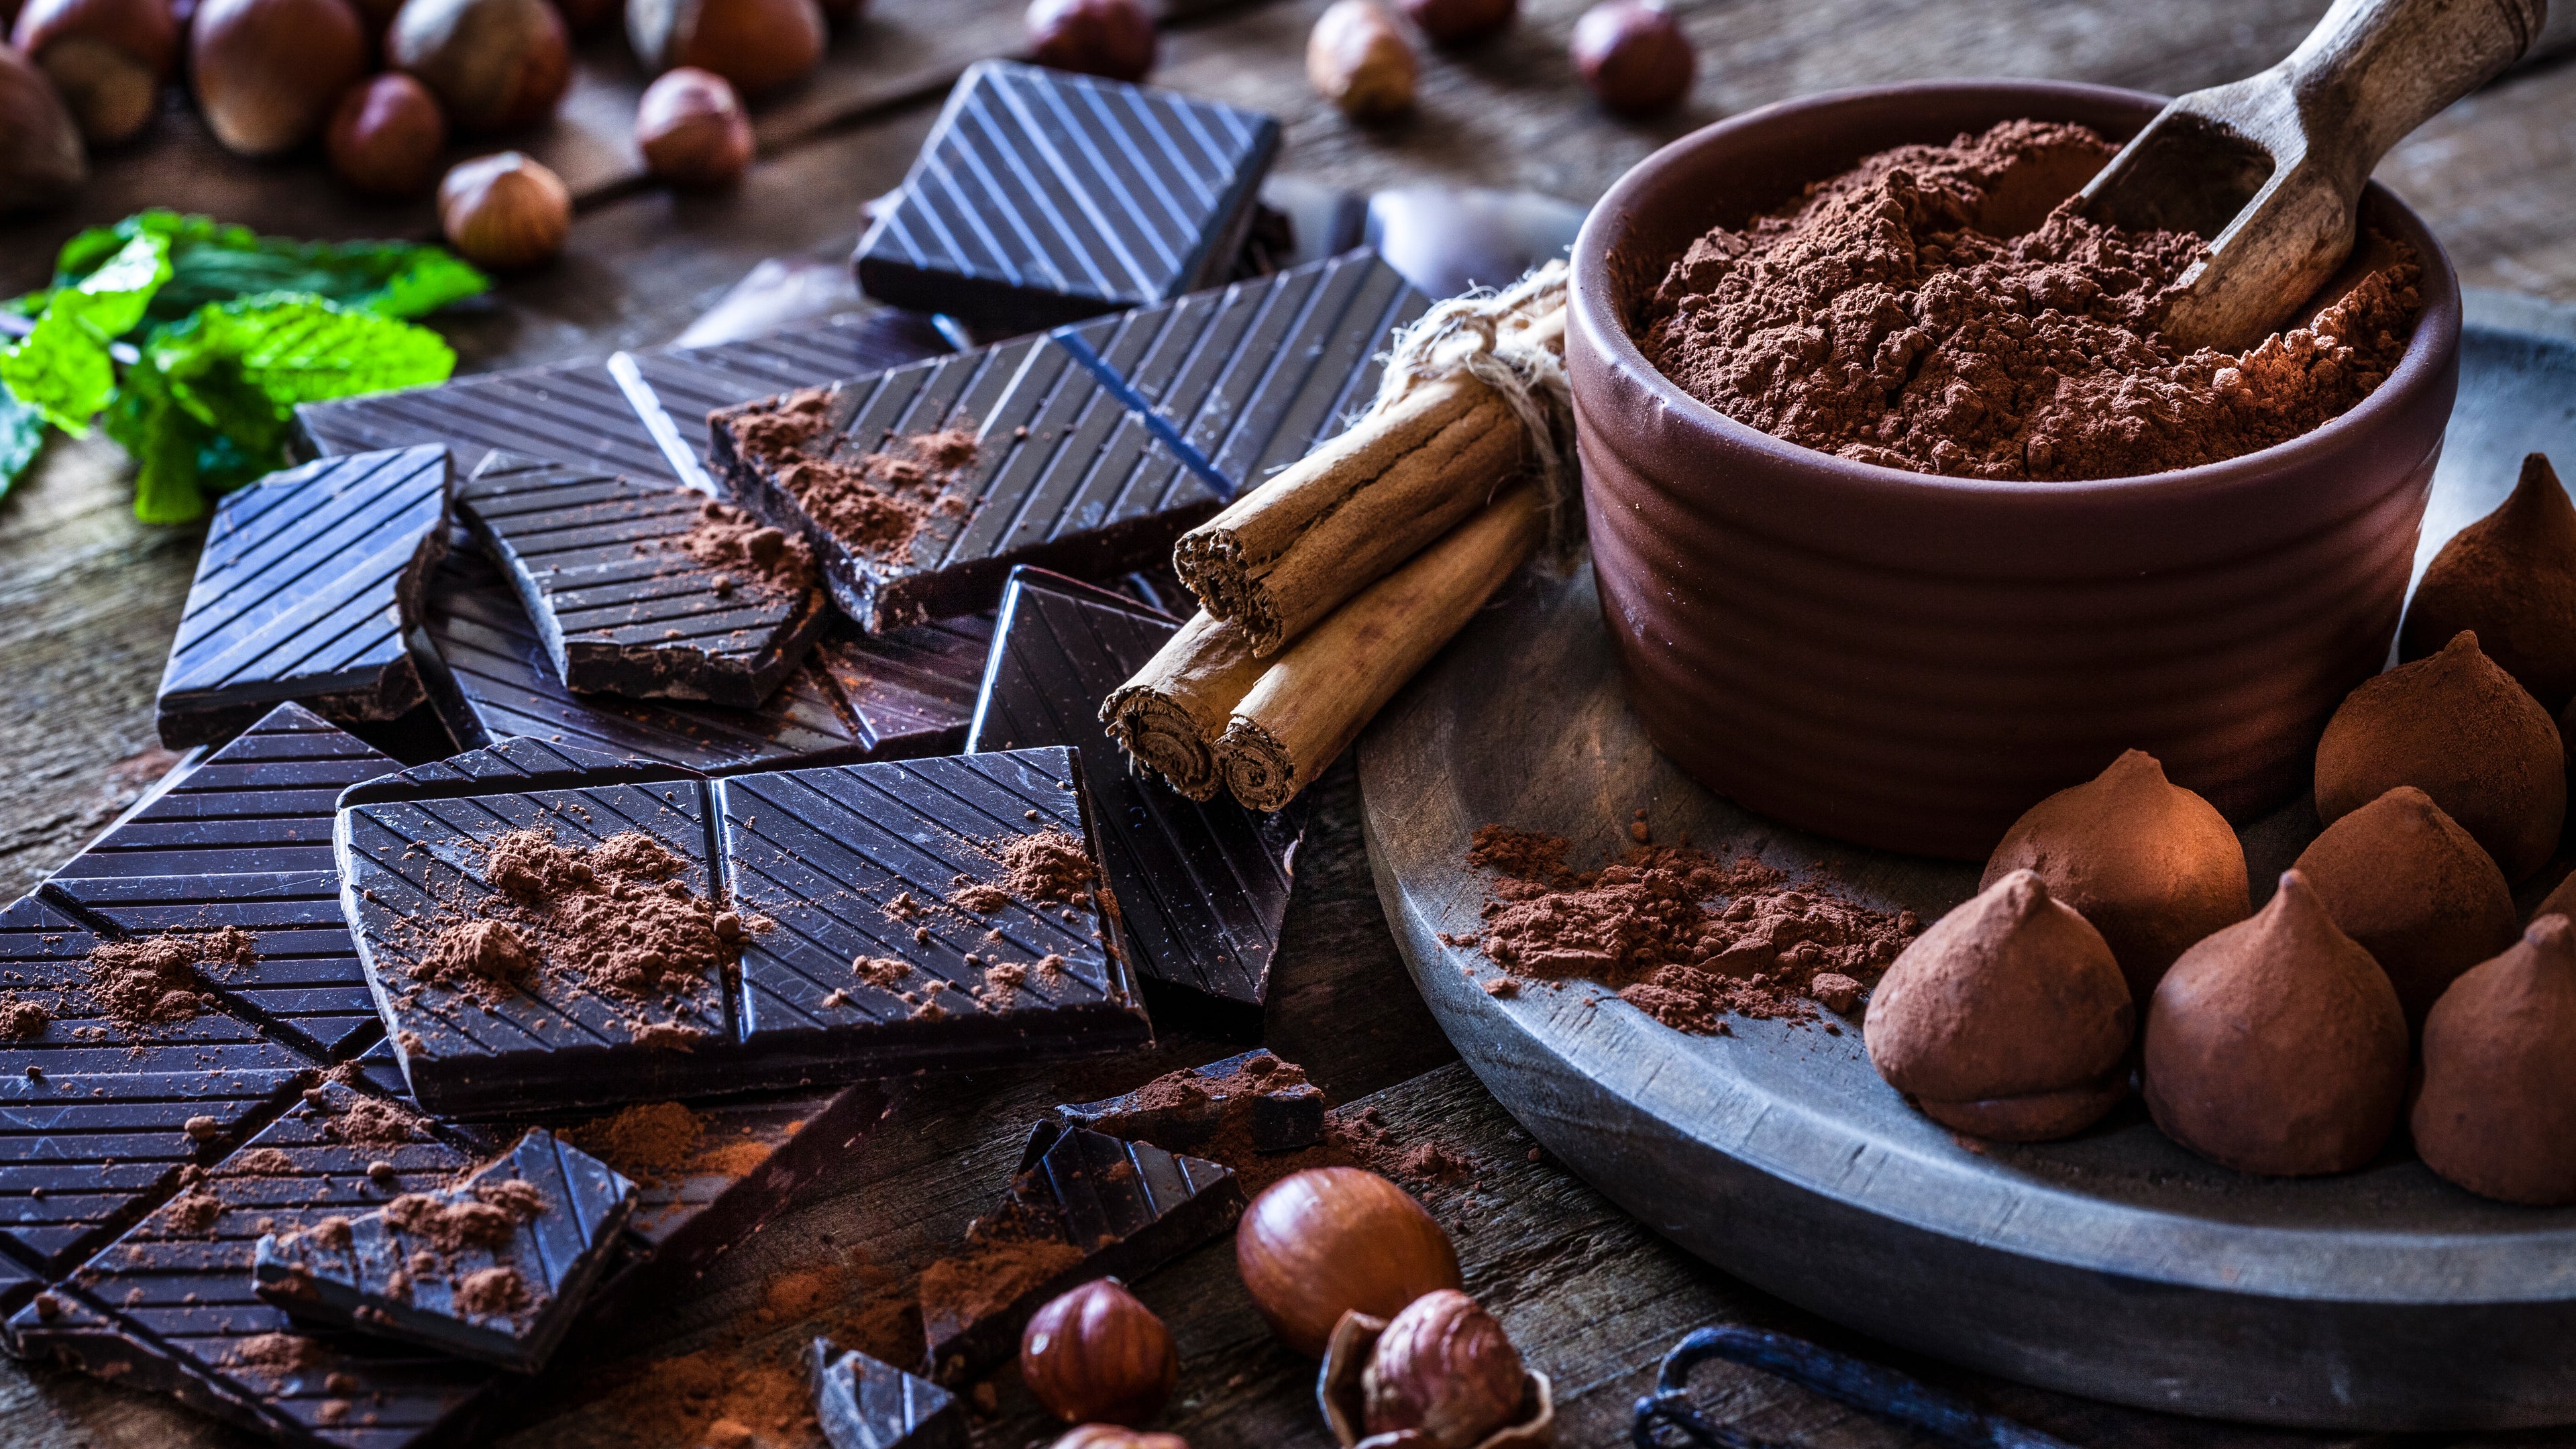 Rustic wooden table filled with ingredient for preparing homemade chocolate truffles.